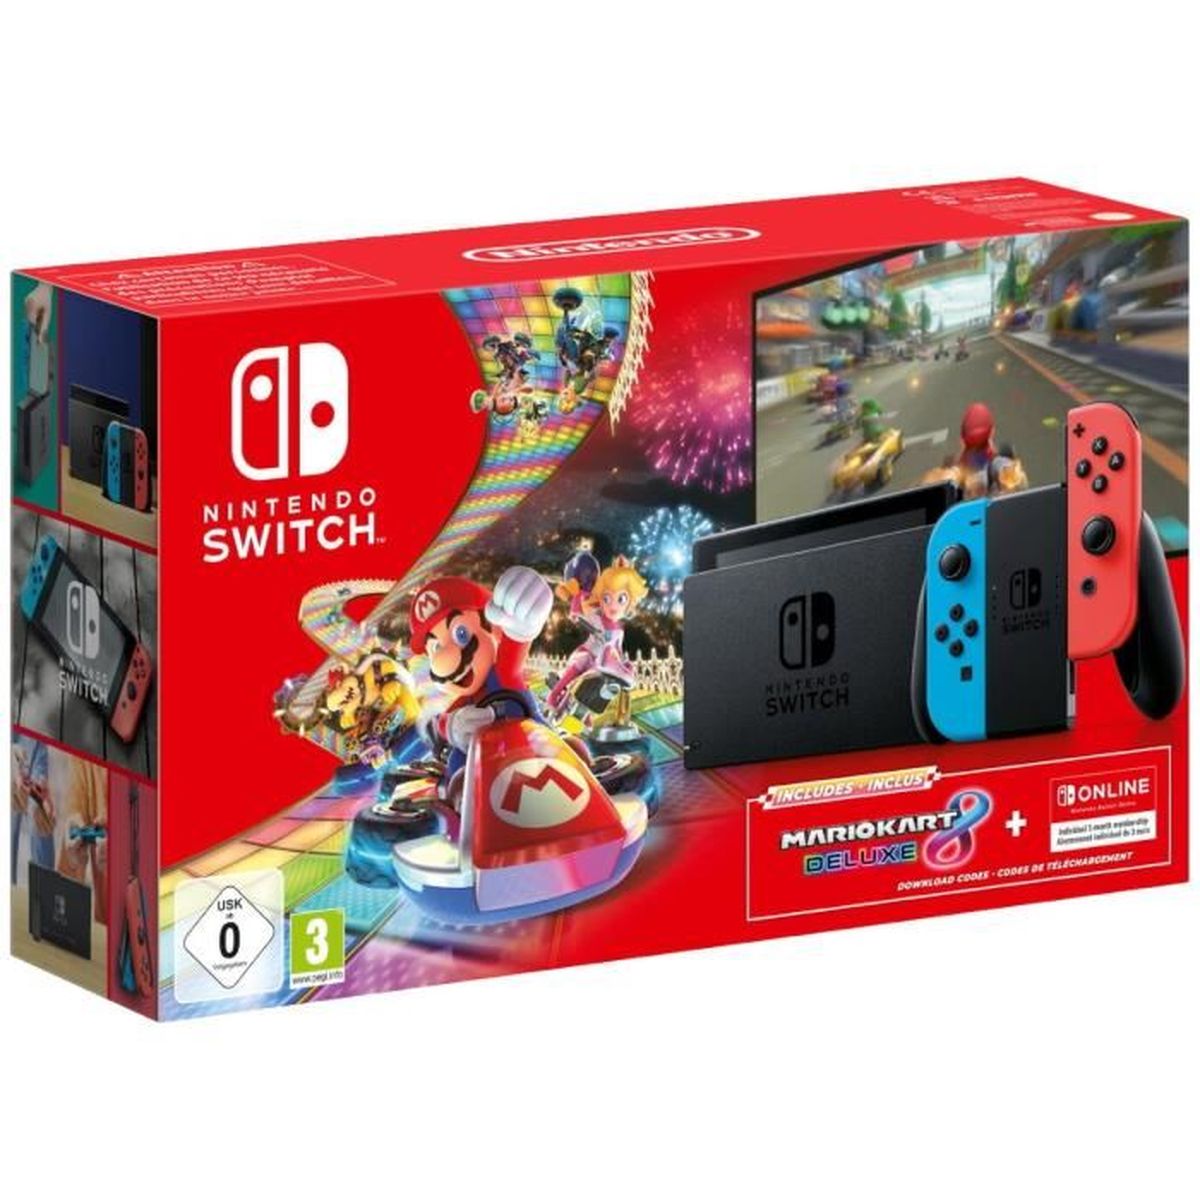 Pack Switch + Mario Kart 8 + 3 months online subscription